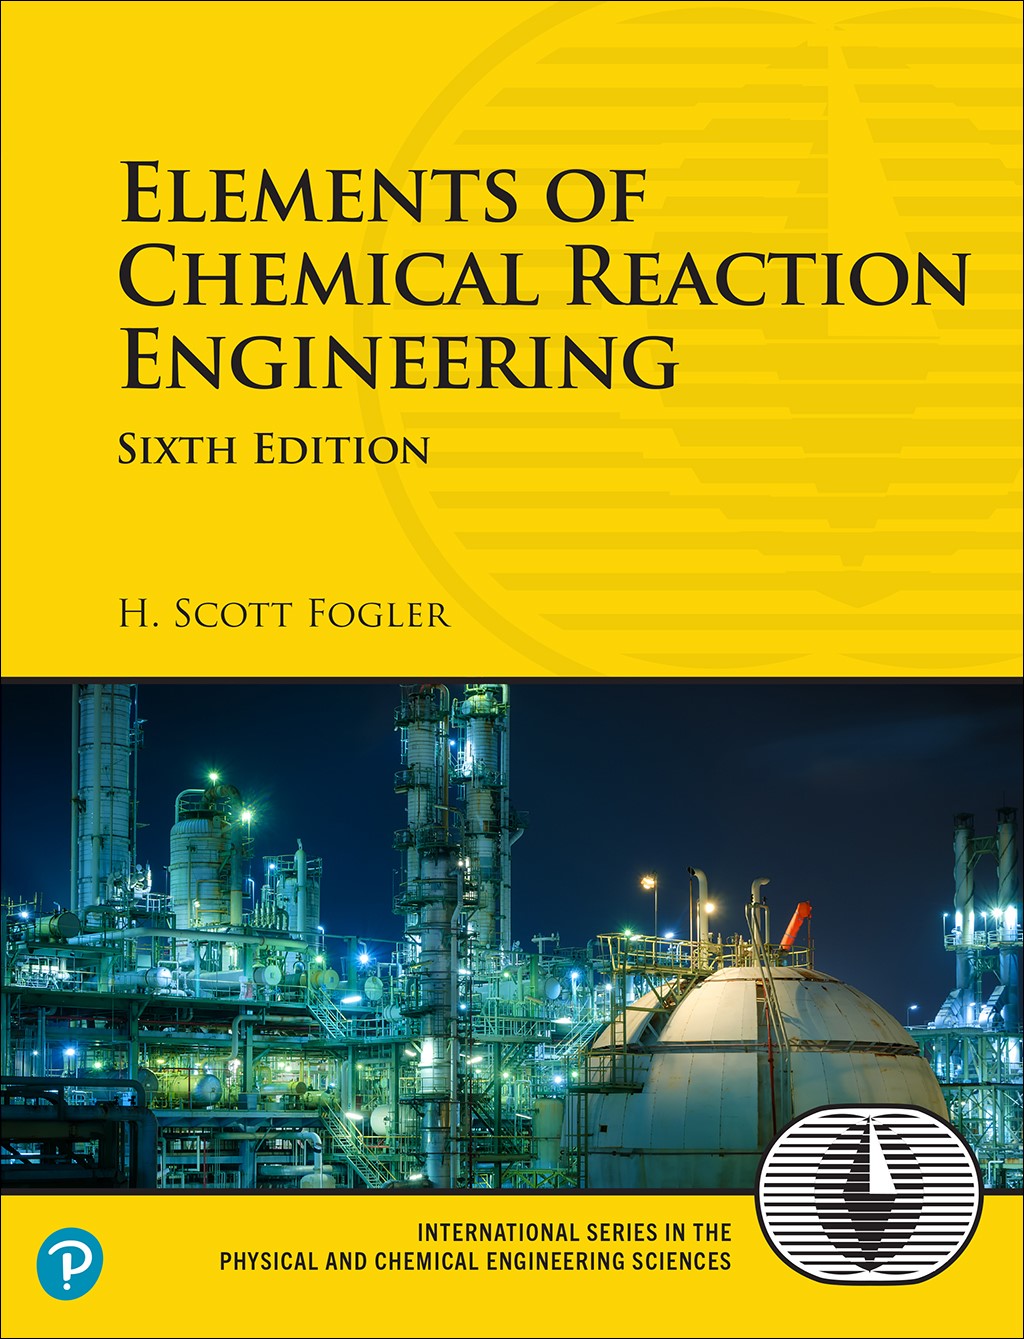 Elements of Chemical Reaction Engineering, 6th Edition